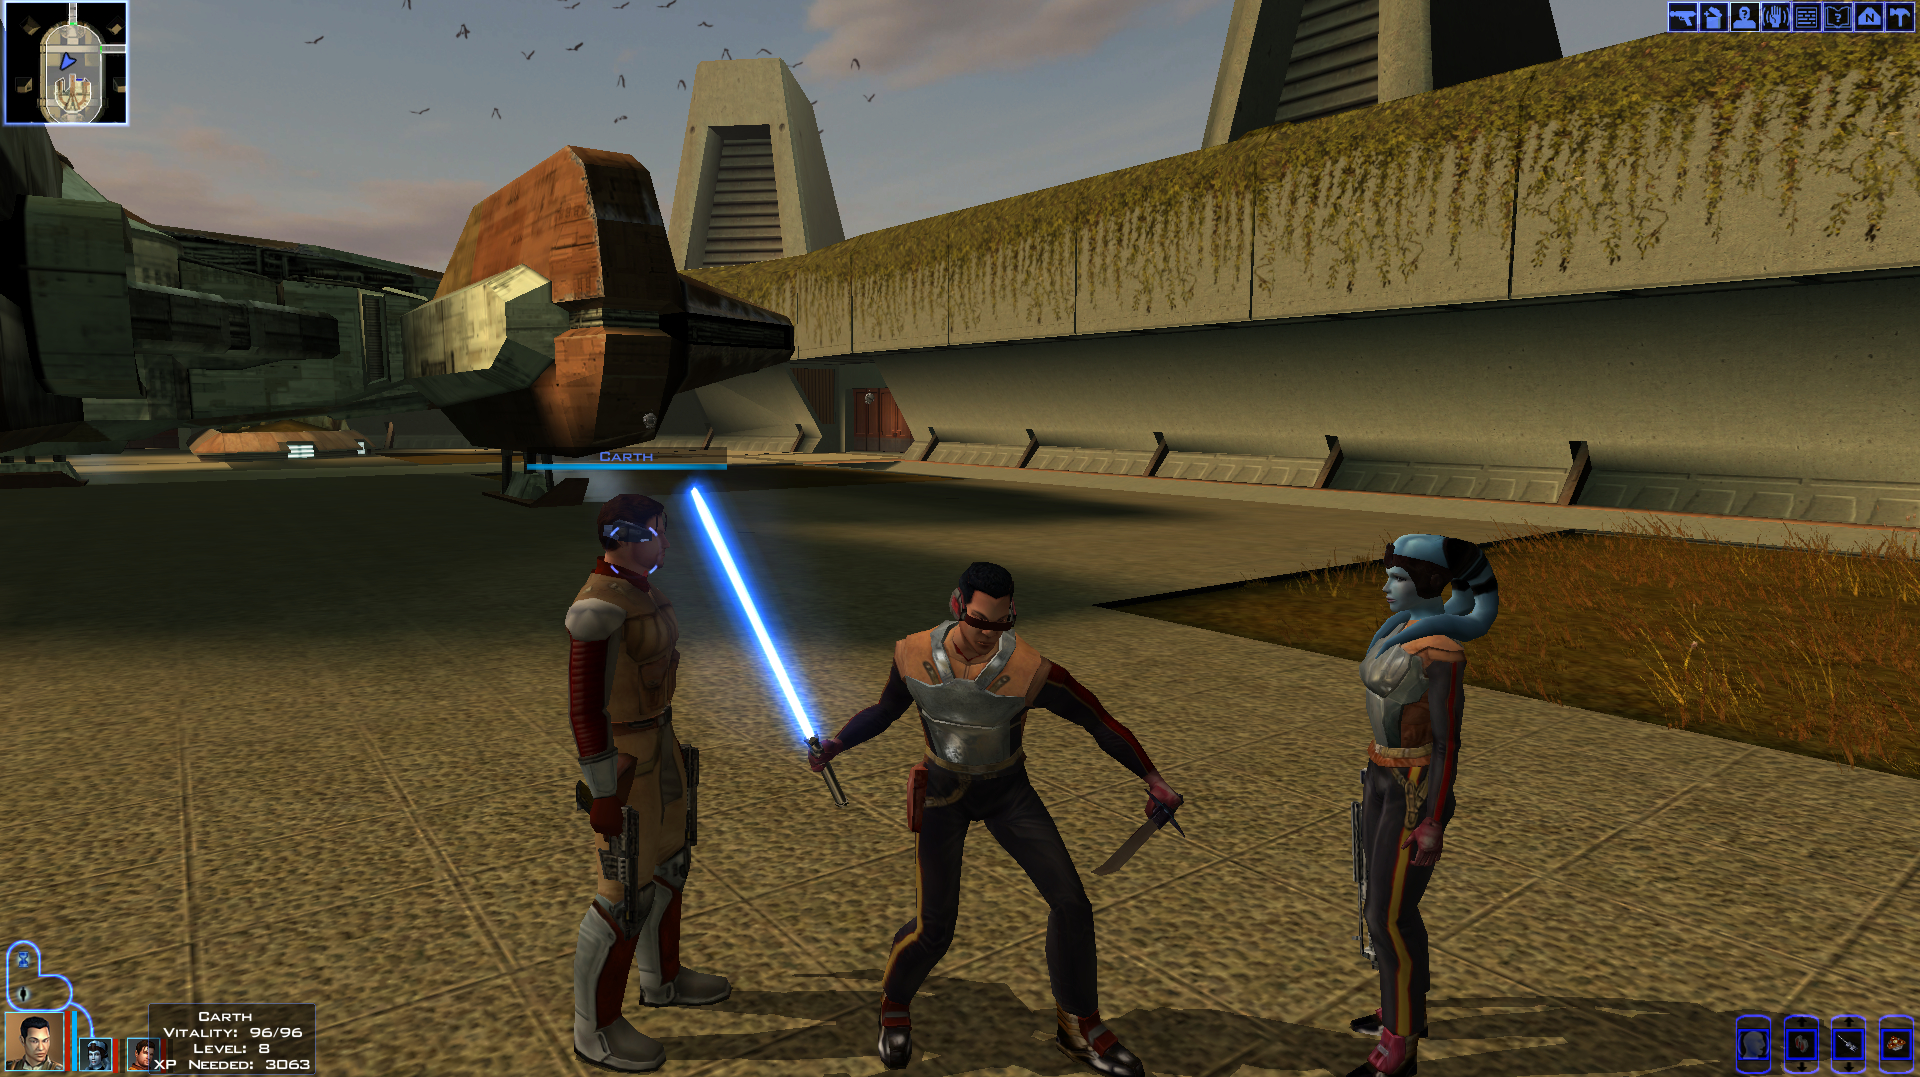 Matt's Video Game Backlog #16: Star Wars: Knights of the Old Republic (2003) feature image